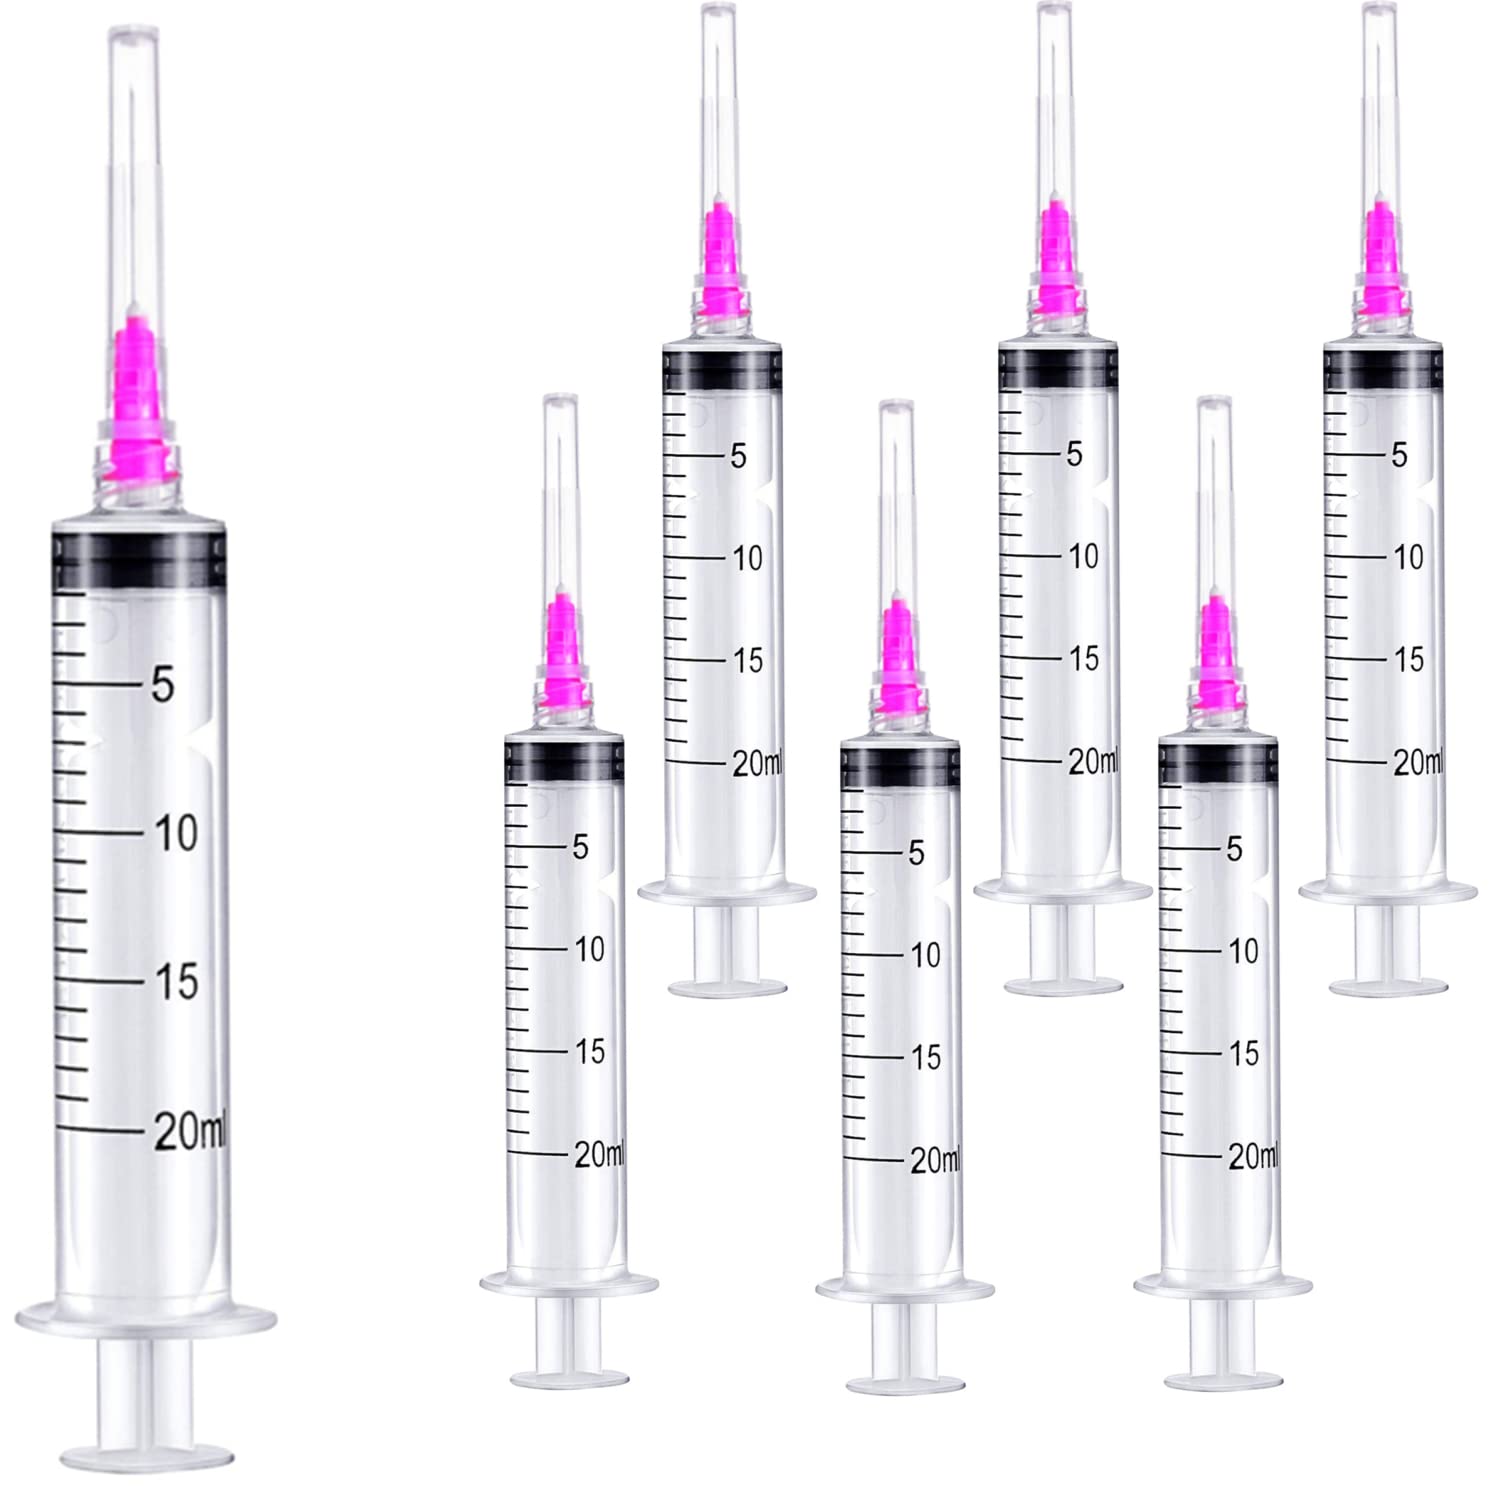 15 Pack 20ml 18Ga Plastic Syringe with Measurement, Disposable Individually Wrapped (15, 20ml-18Ga)